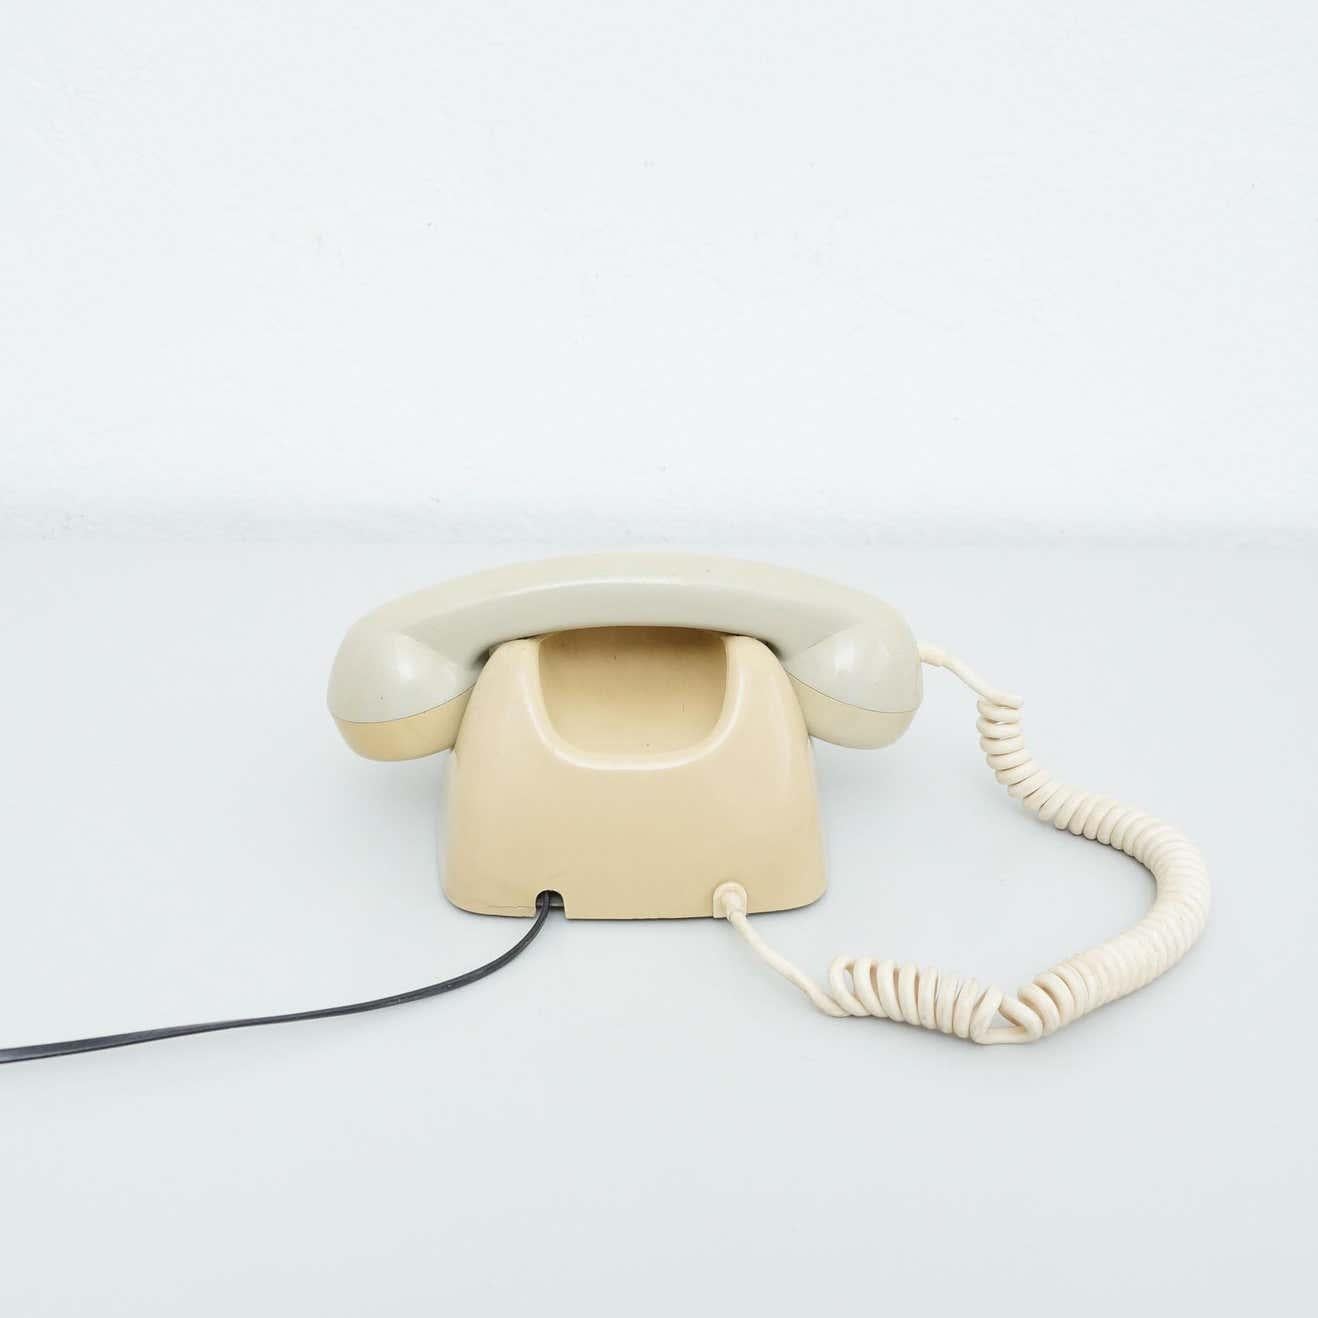 Late 20th Century Vintage Spanish Analog Telephone by Telefonica, circa 1980 For Sale